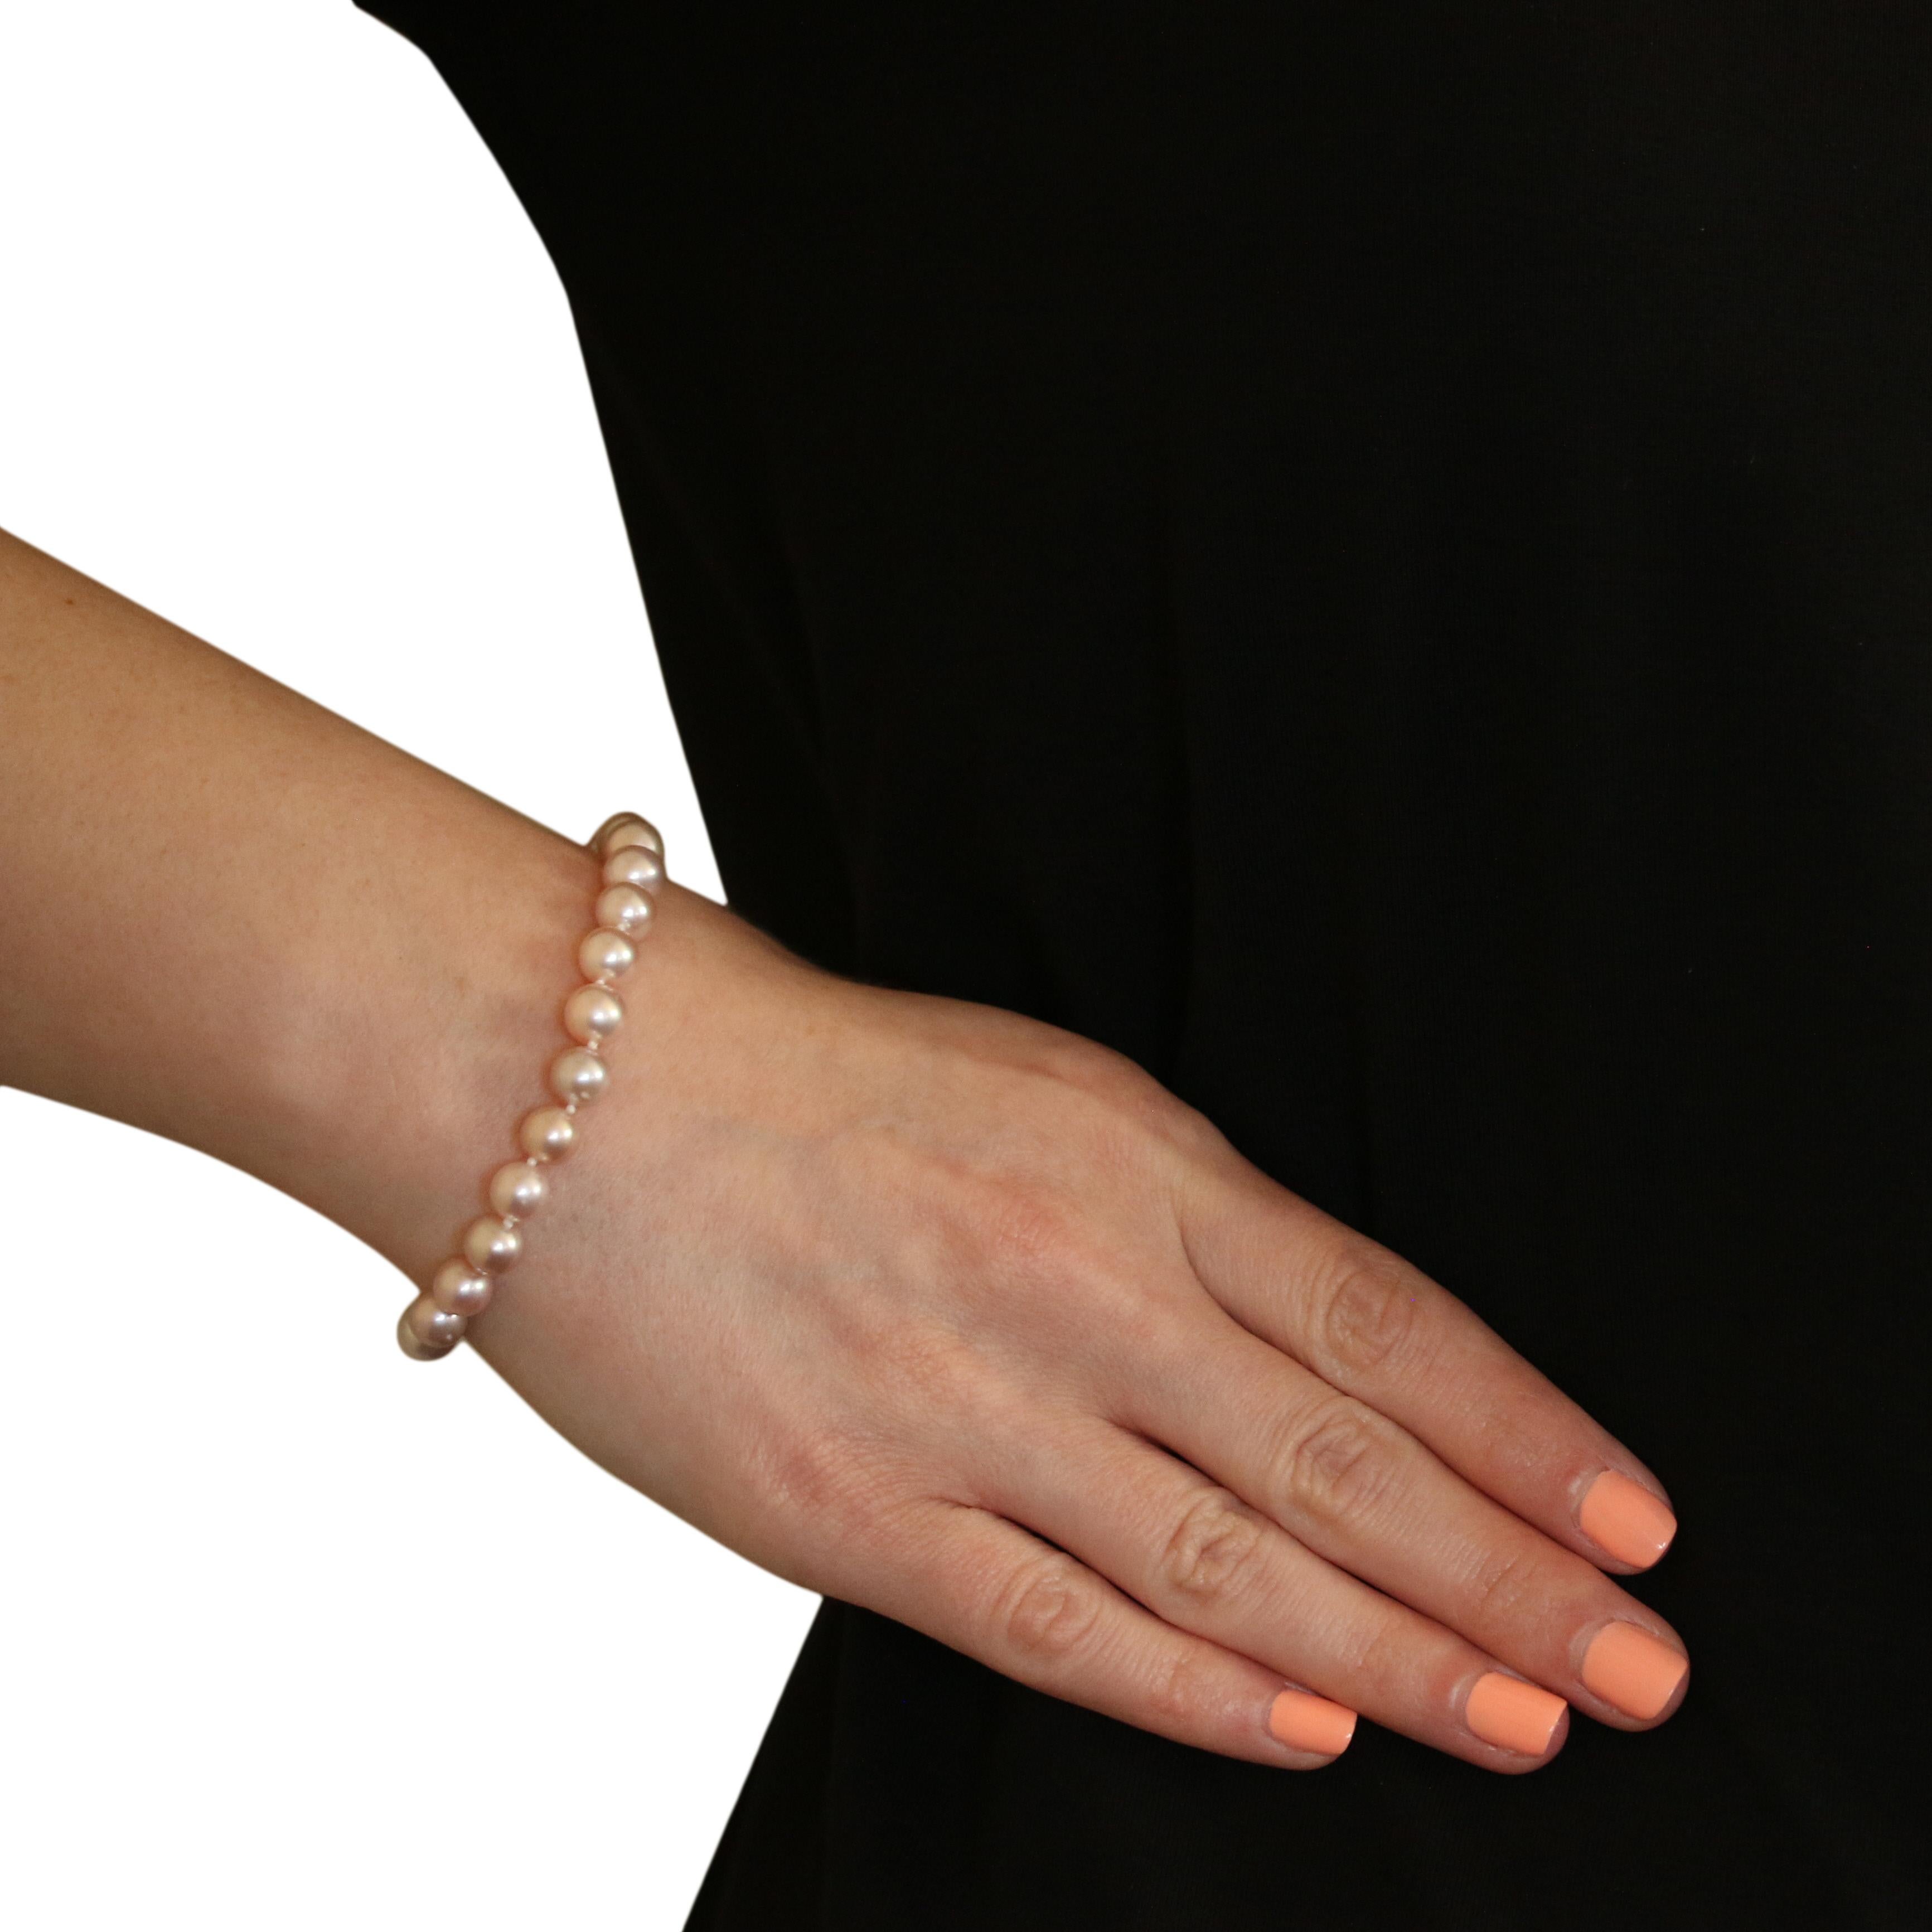 Metal Content: Guaranteed 14k Gold as stamped

Stone Information: 
Cultured Pearls
Diameter Range: 6.9mm - 7.5mm

Bracelet Style: Knotted Strand
Measurements: length 7